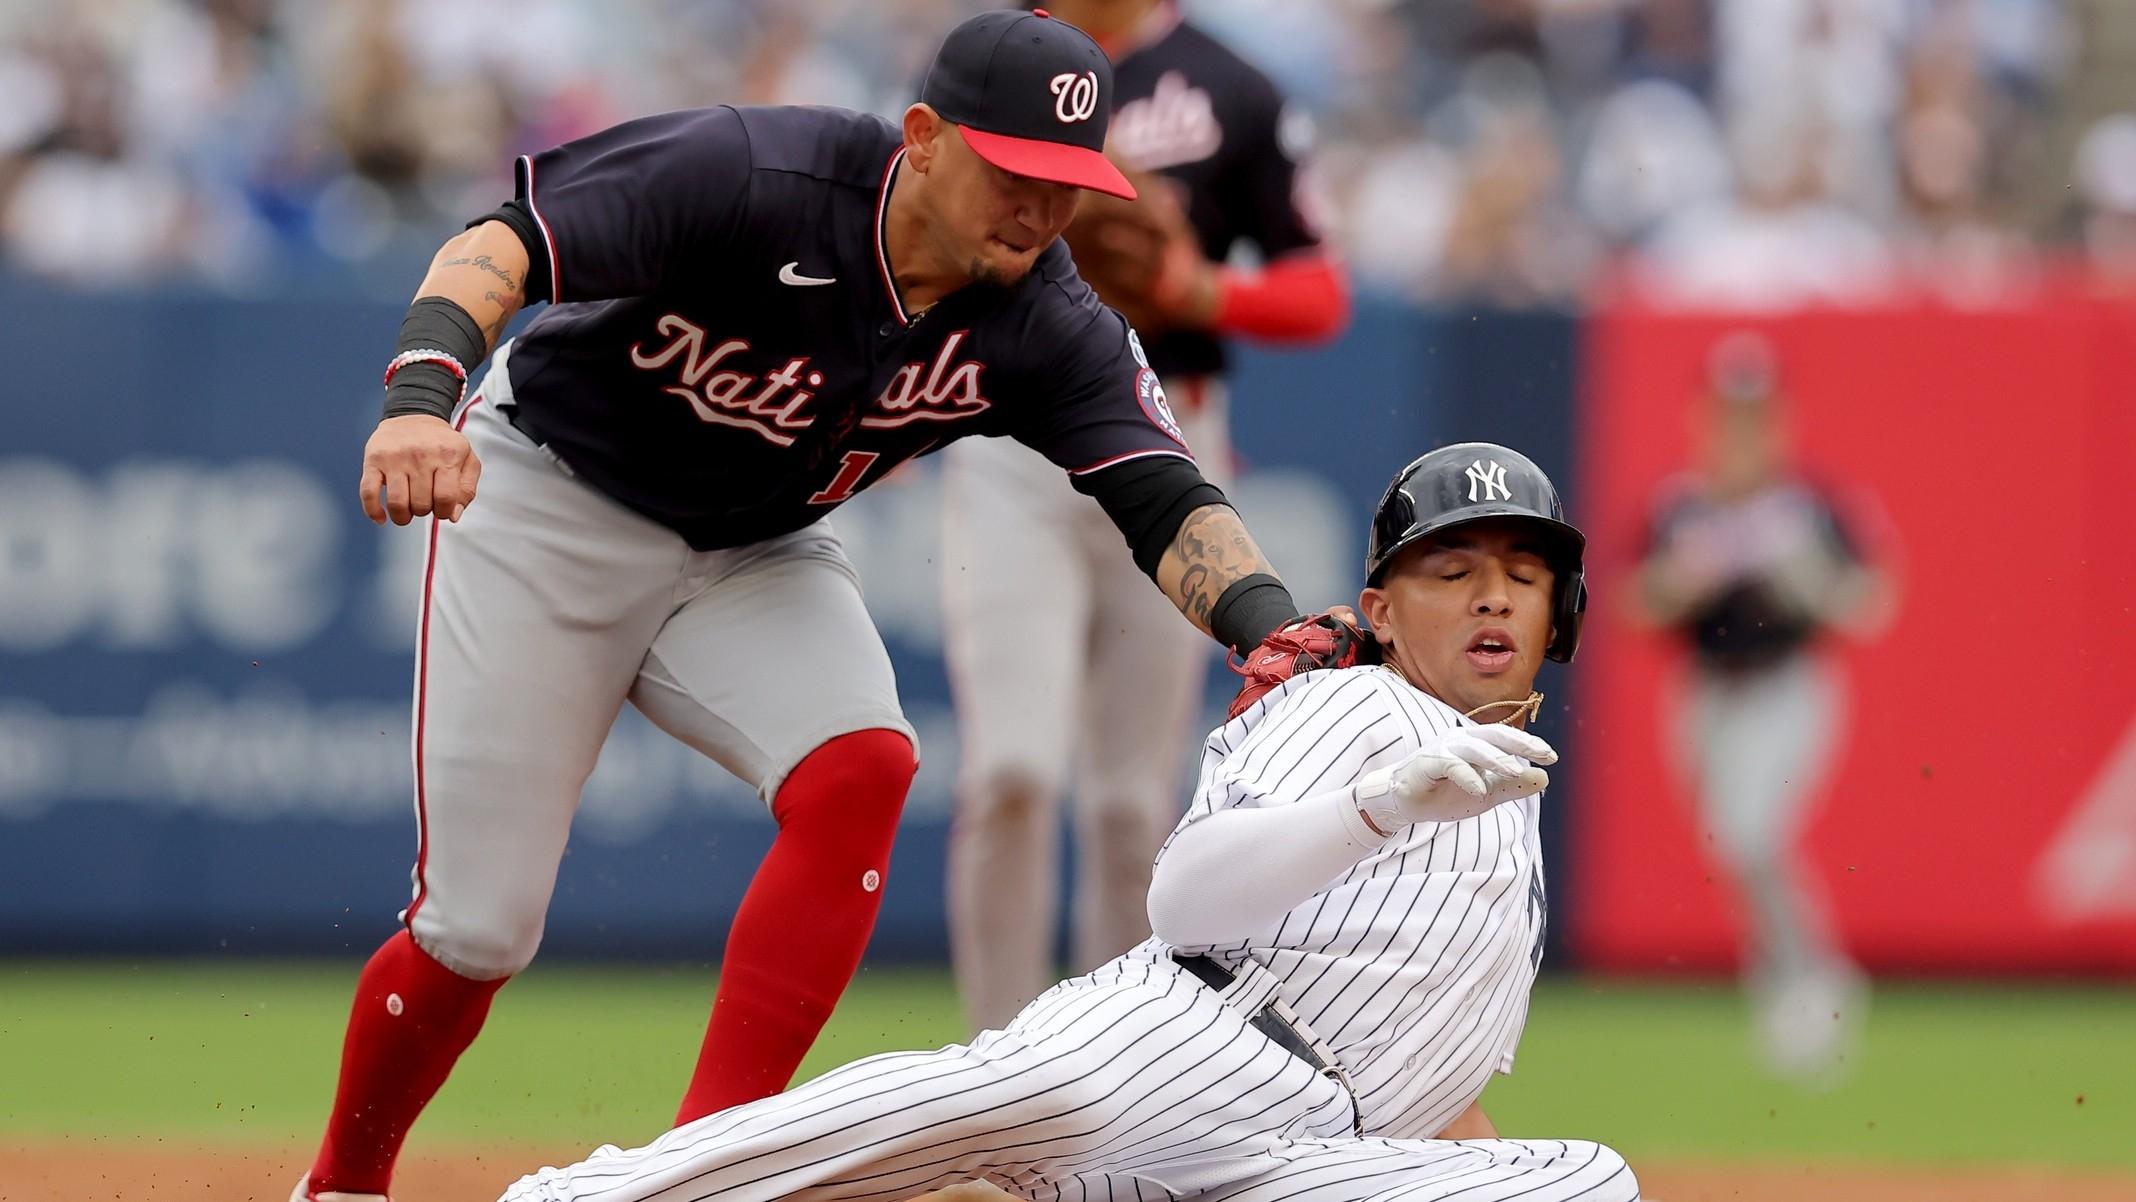 New York Yankees third baseman Oswald Peraza (91) is tagged out by Washington Nationals second baseman Ildemaro Vargas (14) in a rundown after being picked off first base during the second inning at Yankee Stadium. / Brad Penner-USA TODAY Sports